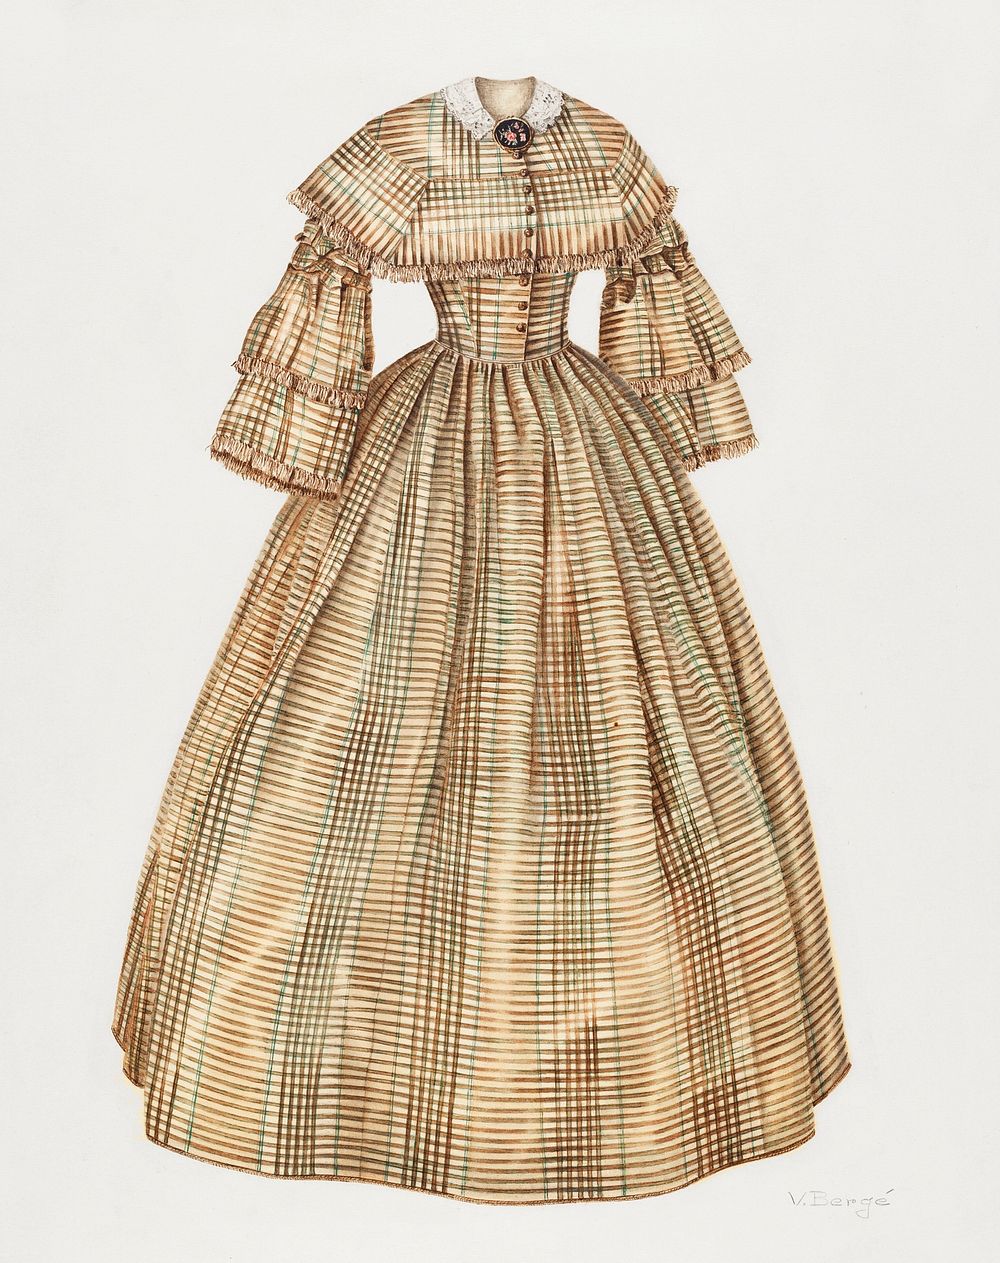 Dress (ca. 1940) by Virginia Berge. Original from The National Gallery of Art. Digitally enhanced by rawpixel.